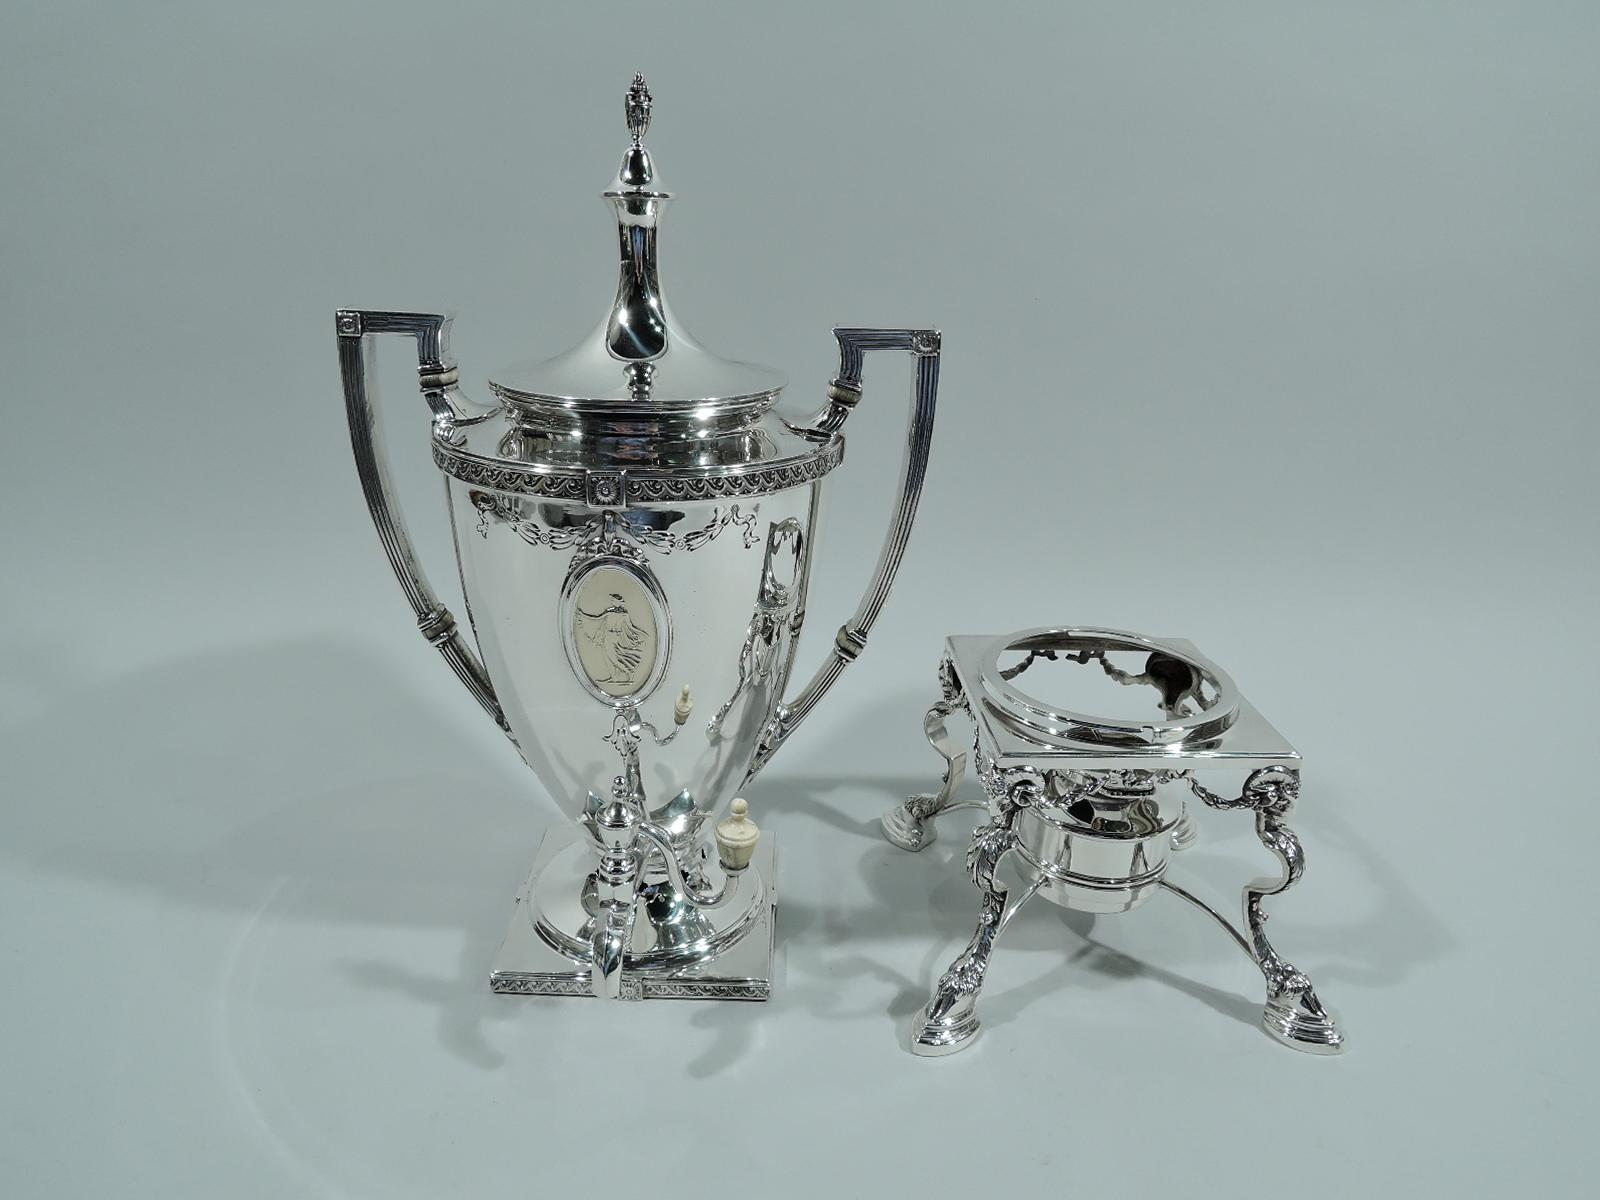 Neoclassical Revival Mt Vernon Pompeiian Sterling Silver 6-Piece Coffee & Tea Set on Tray